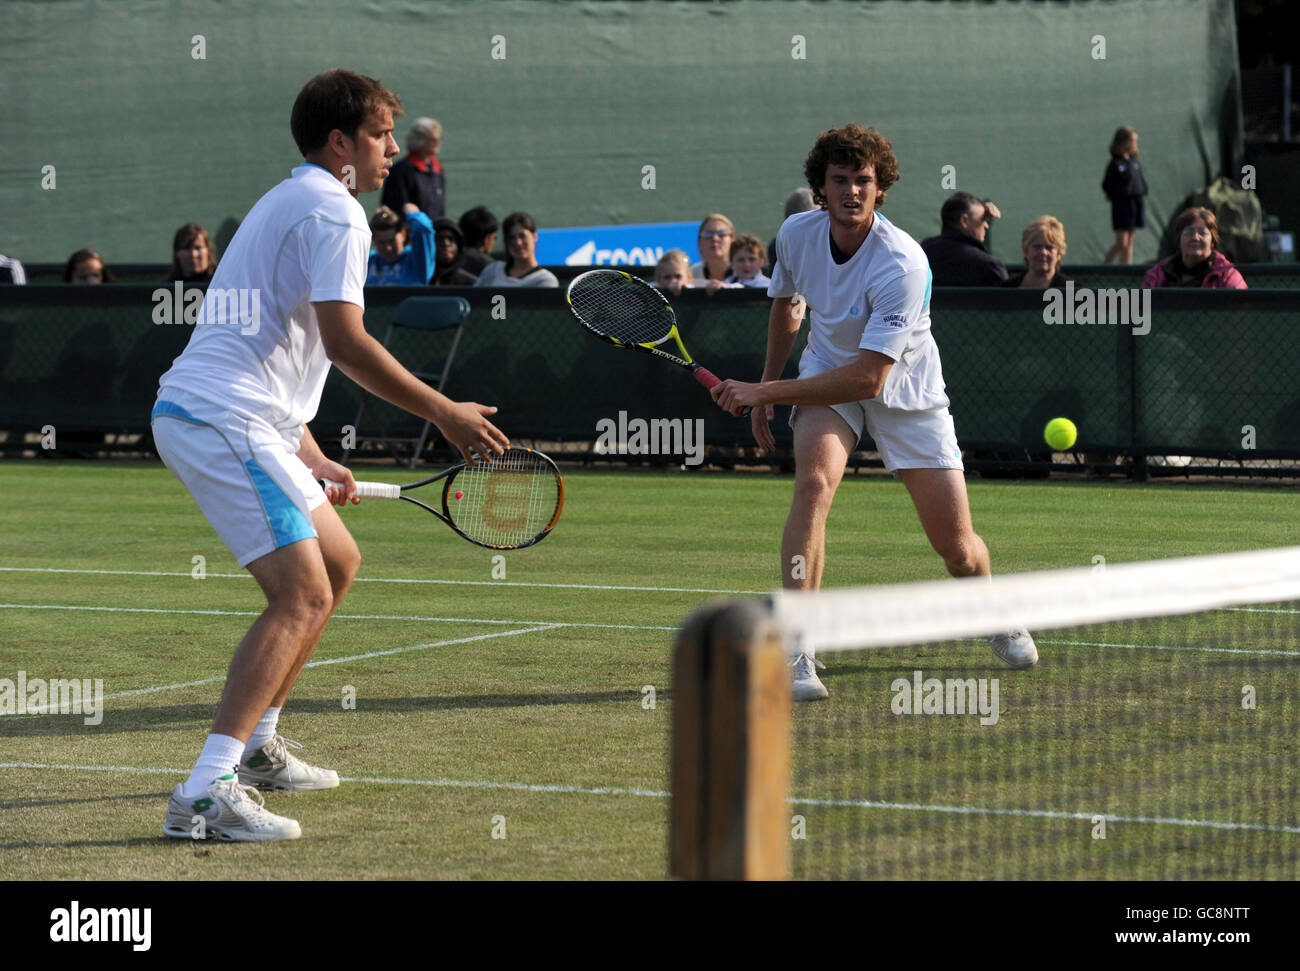 Great Britain's Jamie Murray (right) and doubles partner Luxembourg's Gilles Muller in action during their match against USA's Robert Kendrick and Jesse Levine Stock Photo